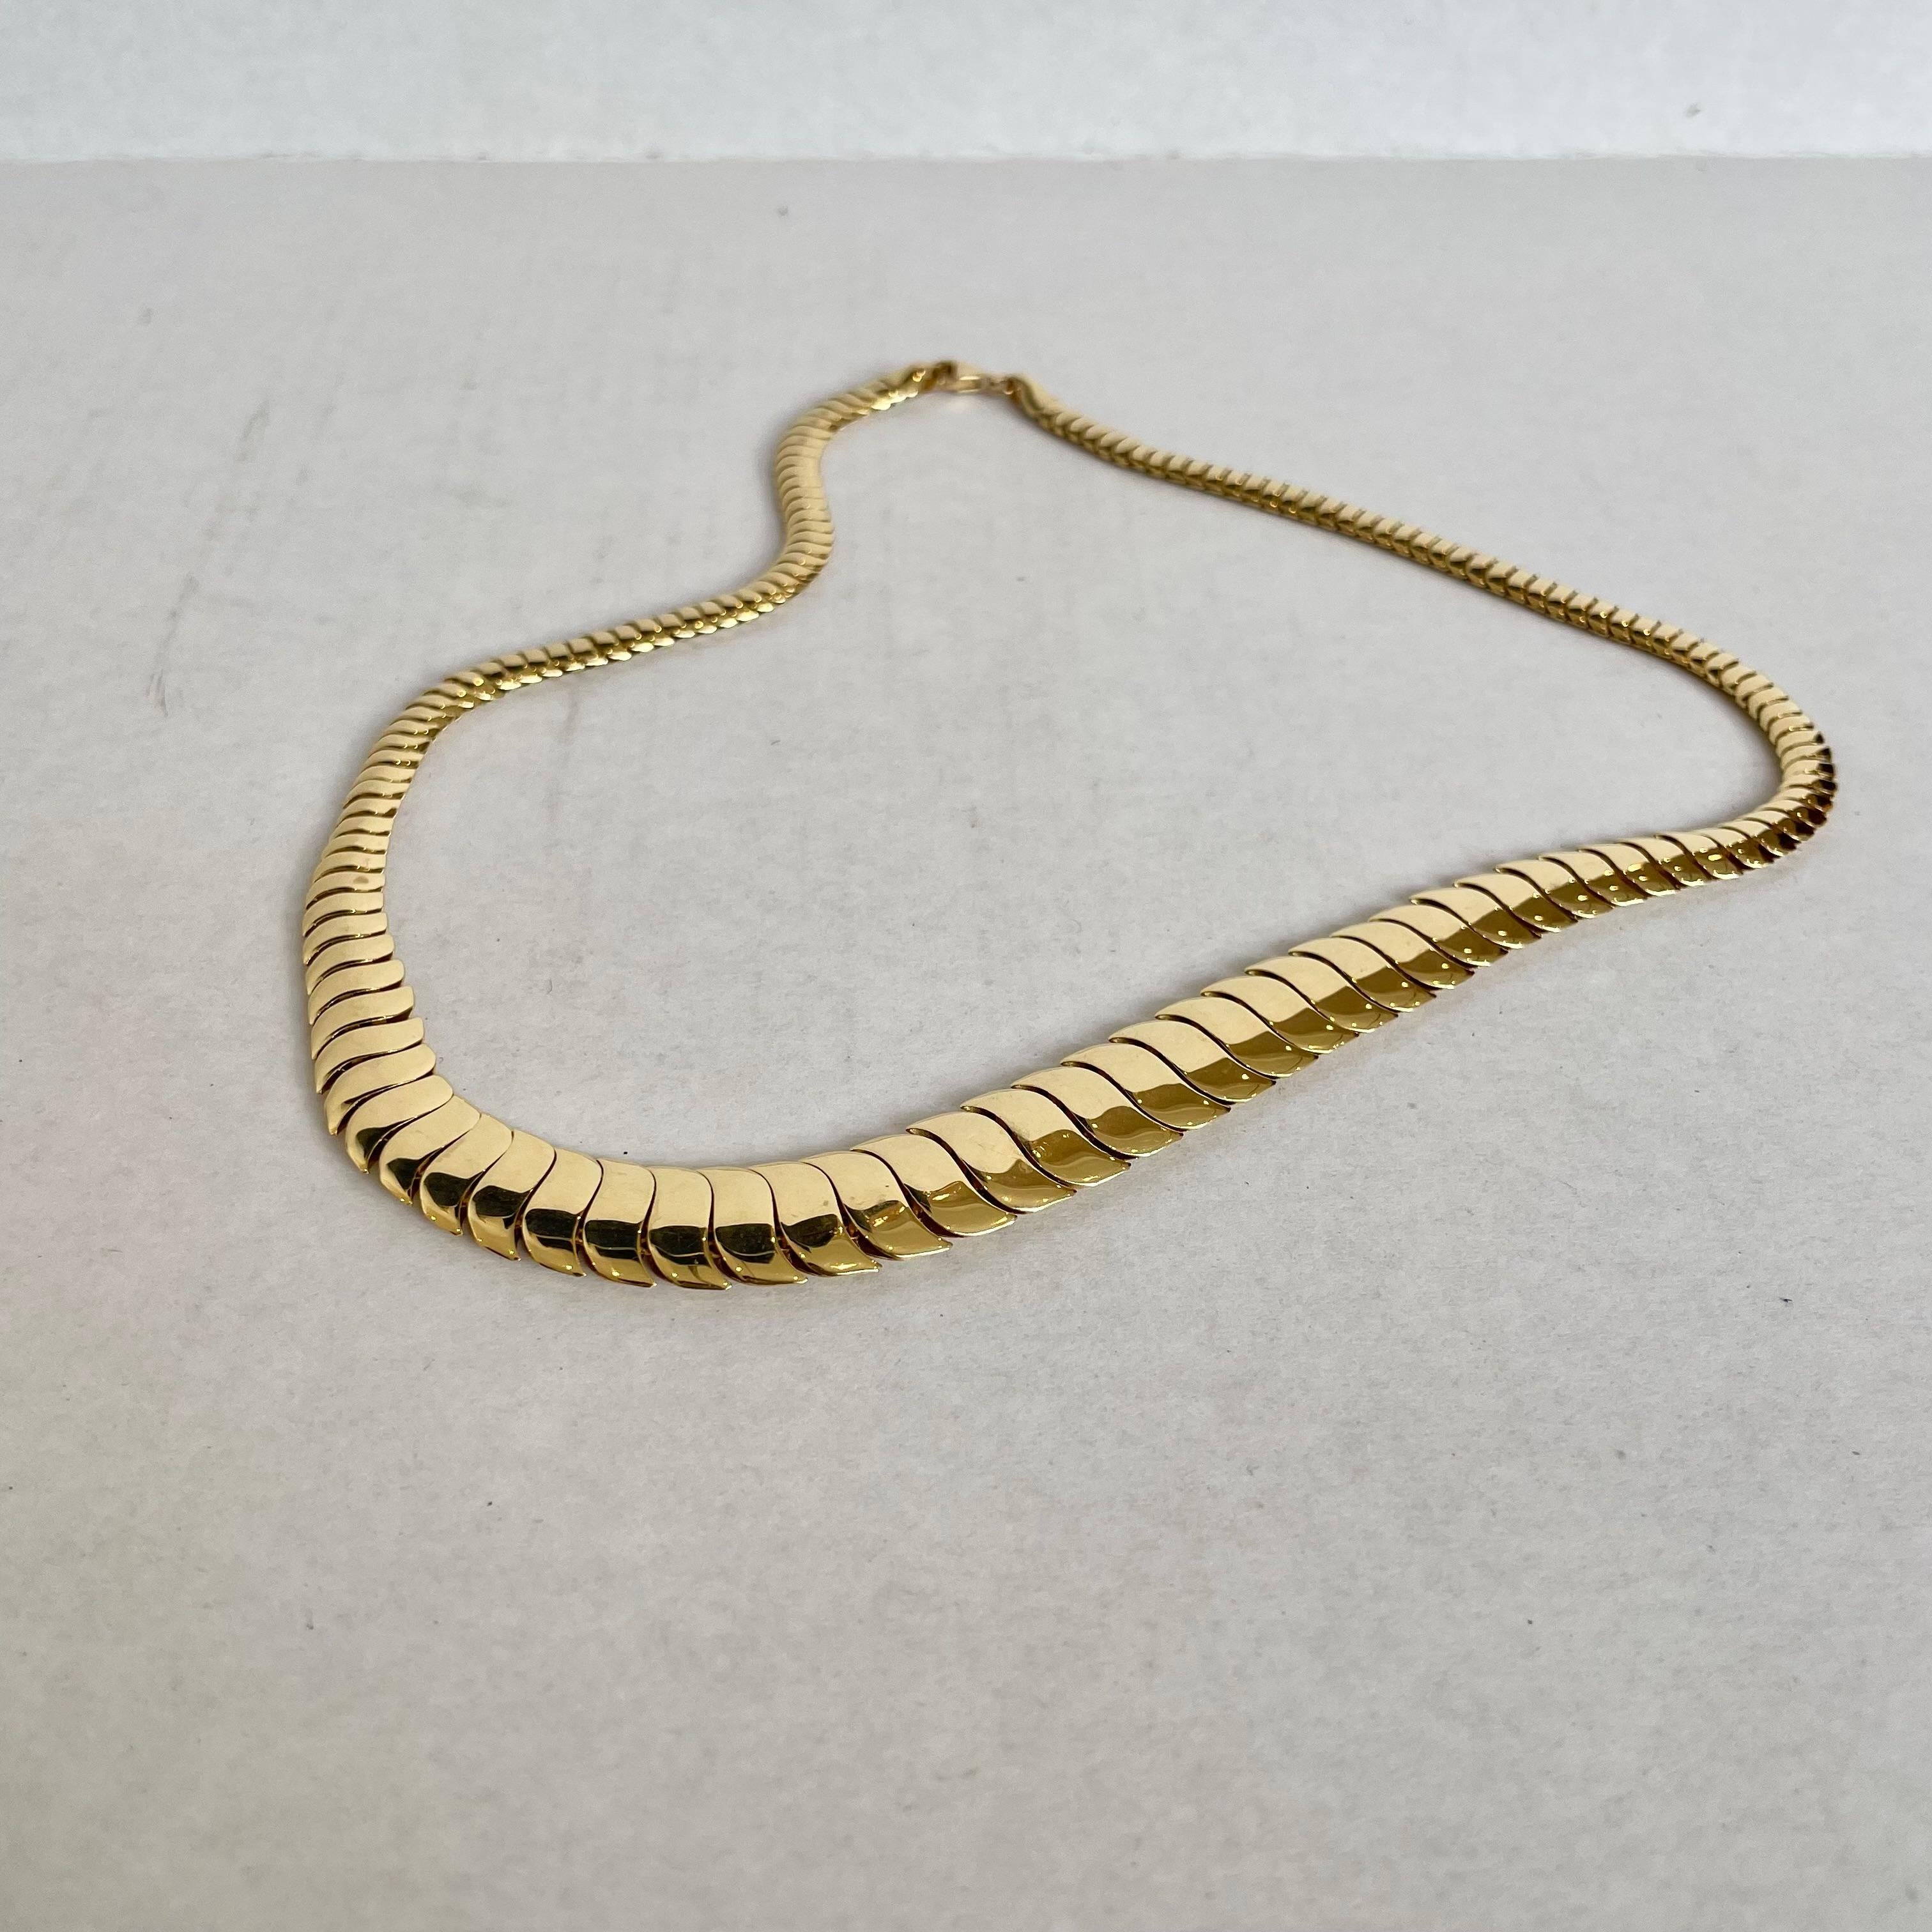 Late 20th Century Roseark Flexible S Necklace in 18k Gold